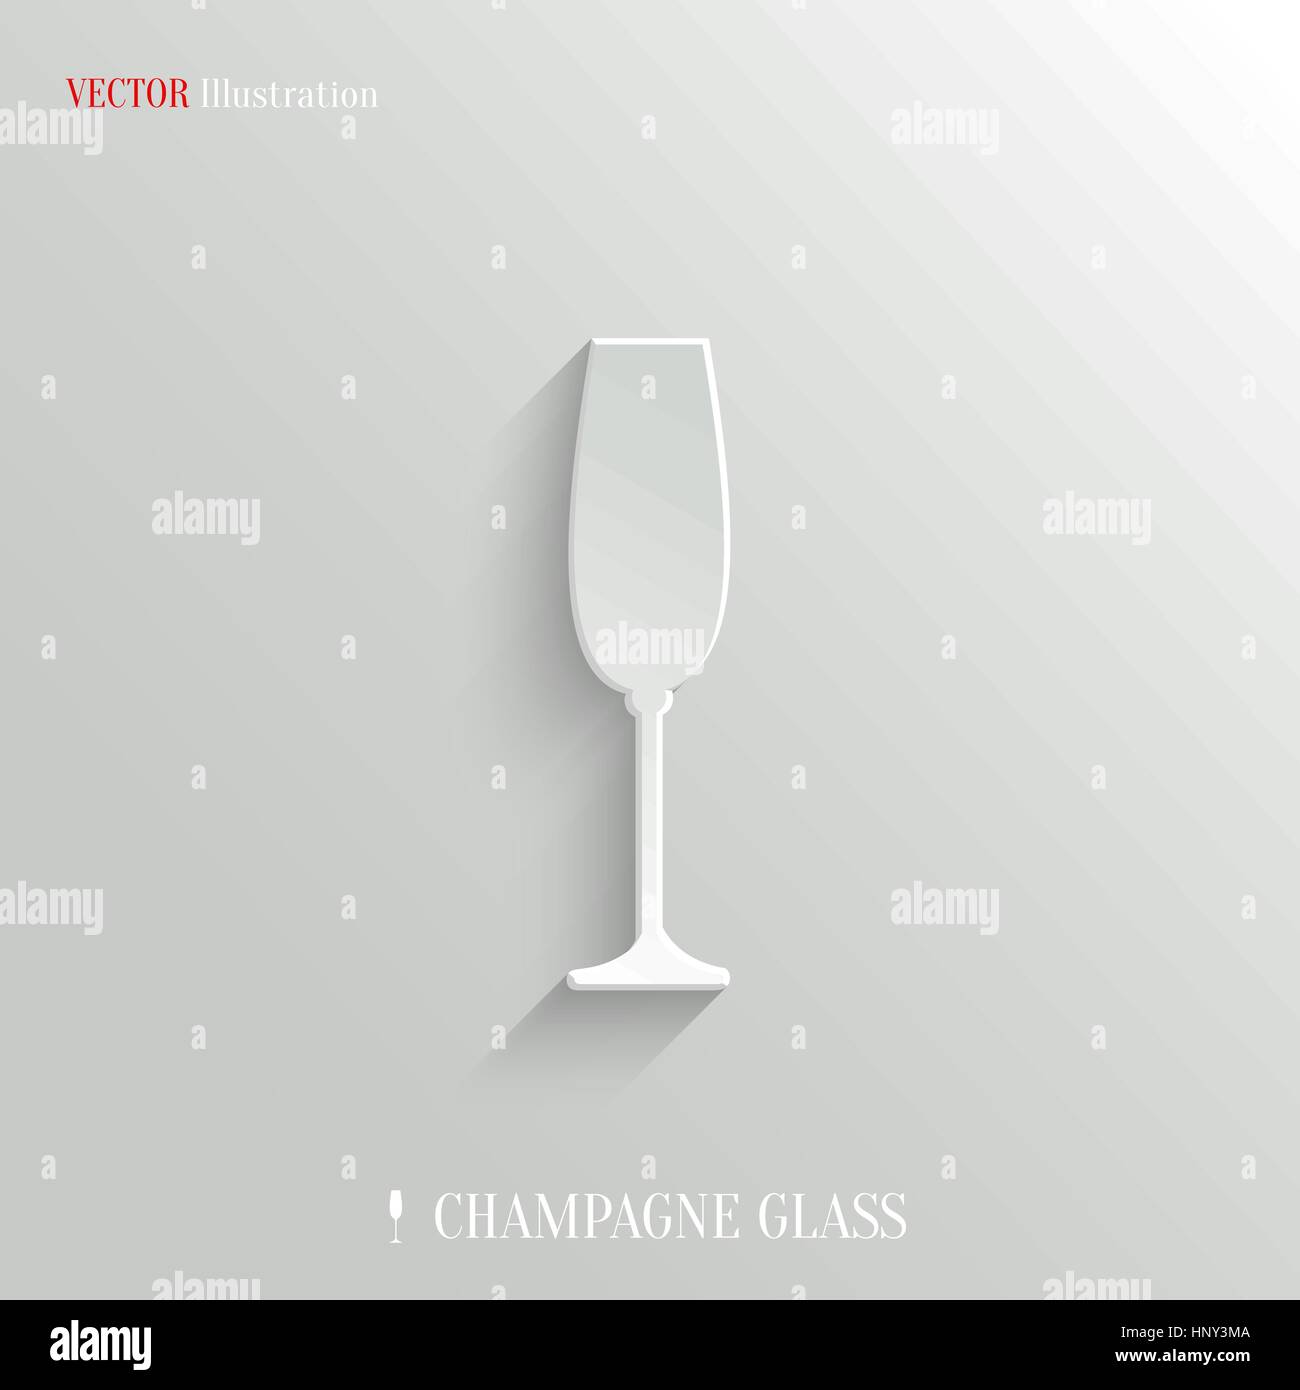 Champagne glass icon - vector web illustration, easy paste to any background Stock Vector